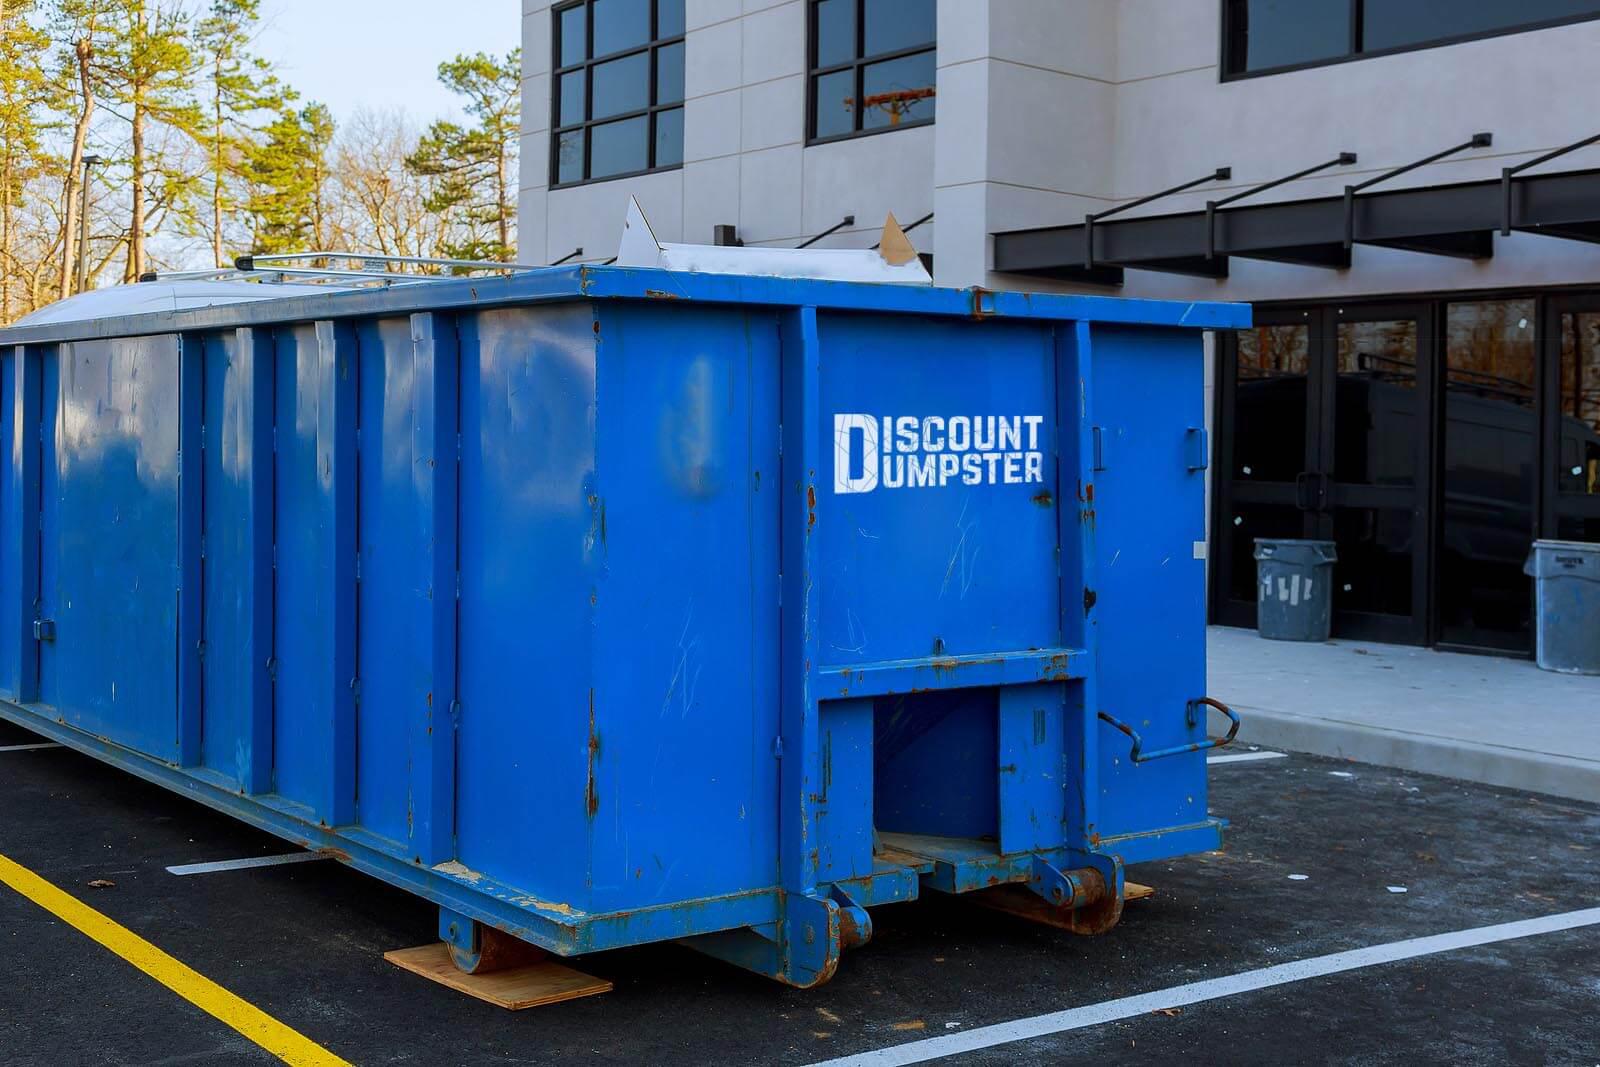 Discount dumpster has commercial waste removal services in Denver co